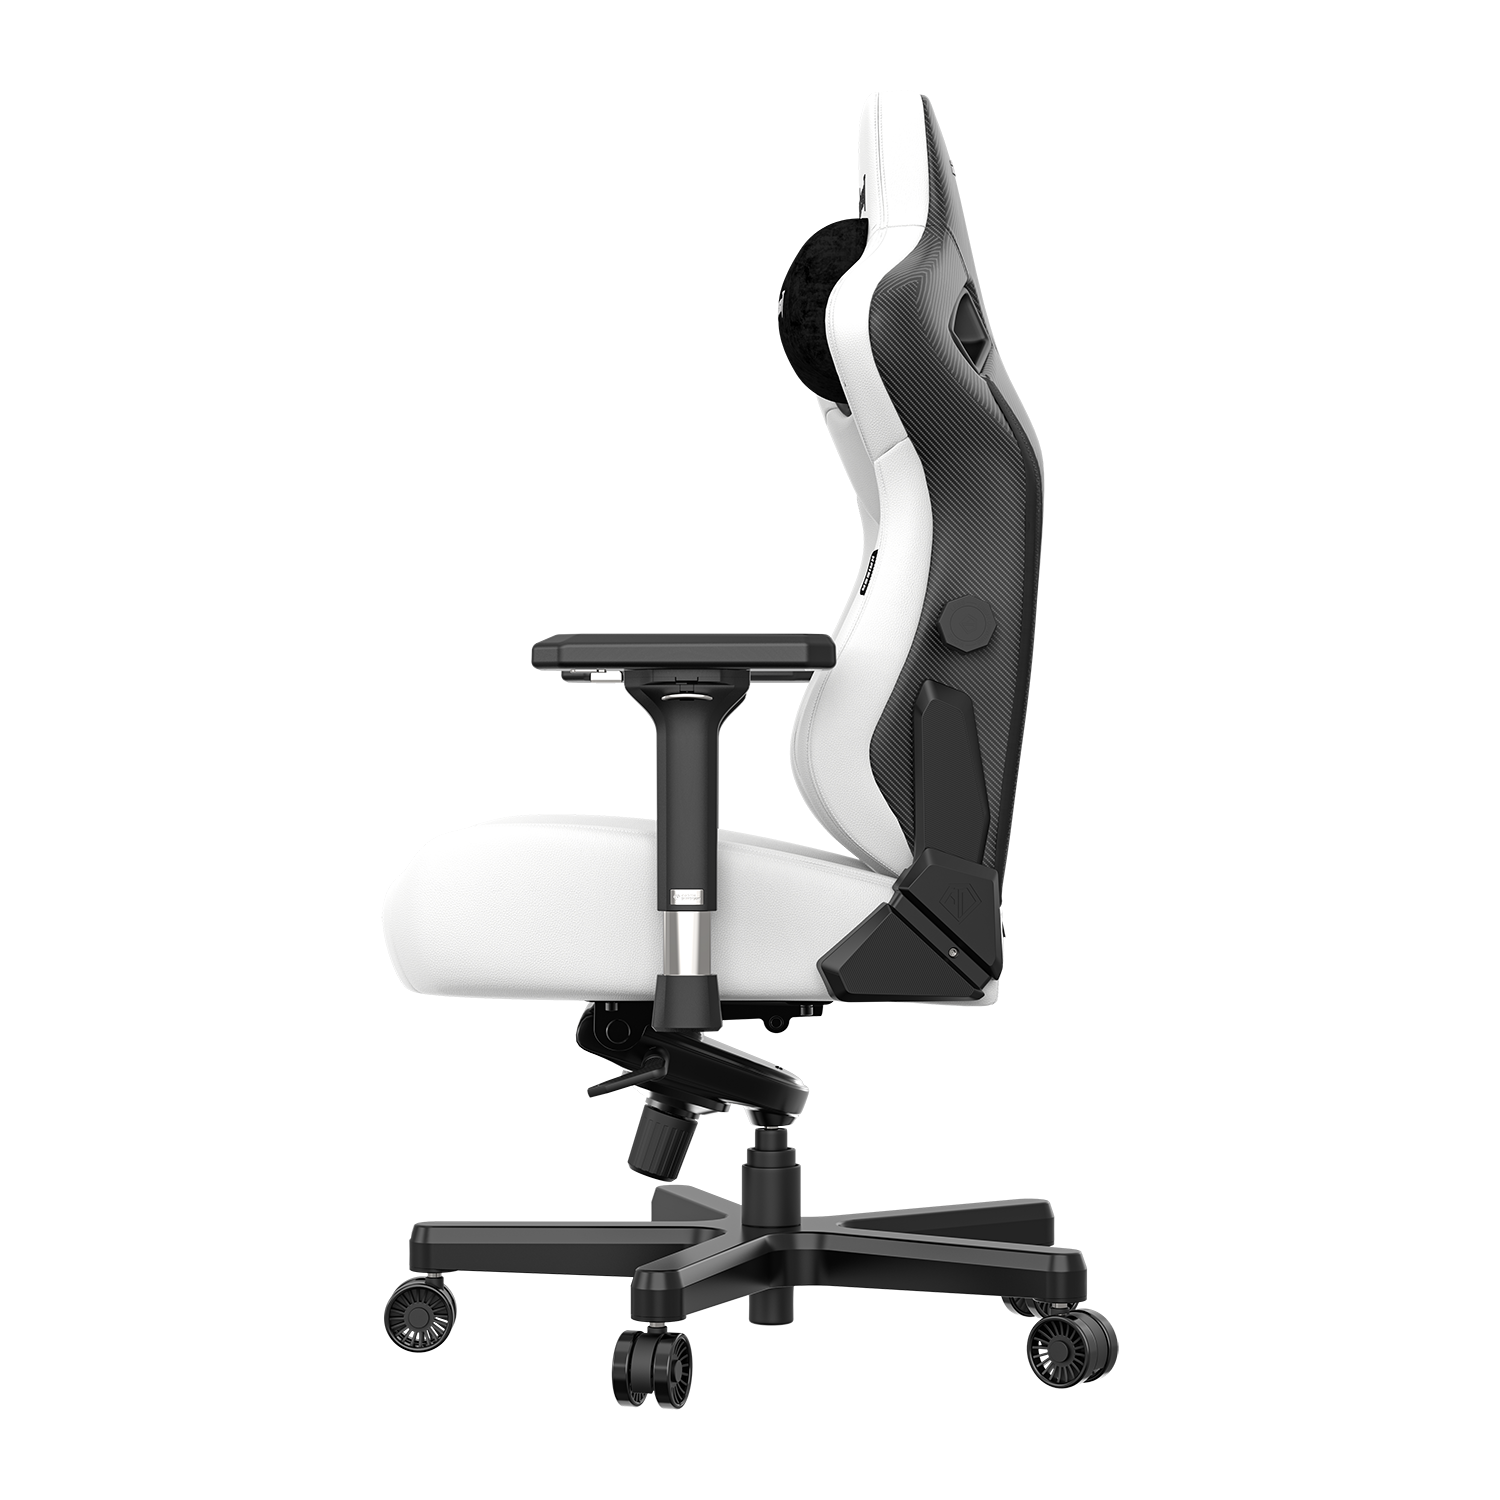 ANDA SEAT KAISER 3 L SIZE DURAXTRA LEATHERETTE - CLOUDY WHITE